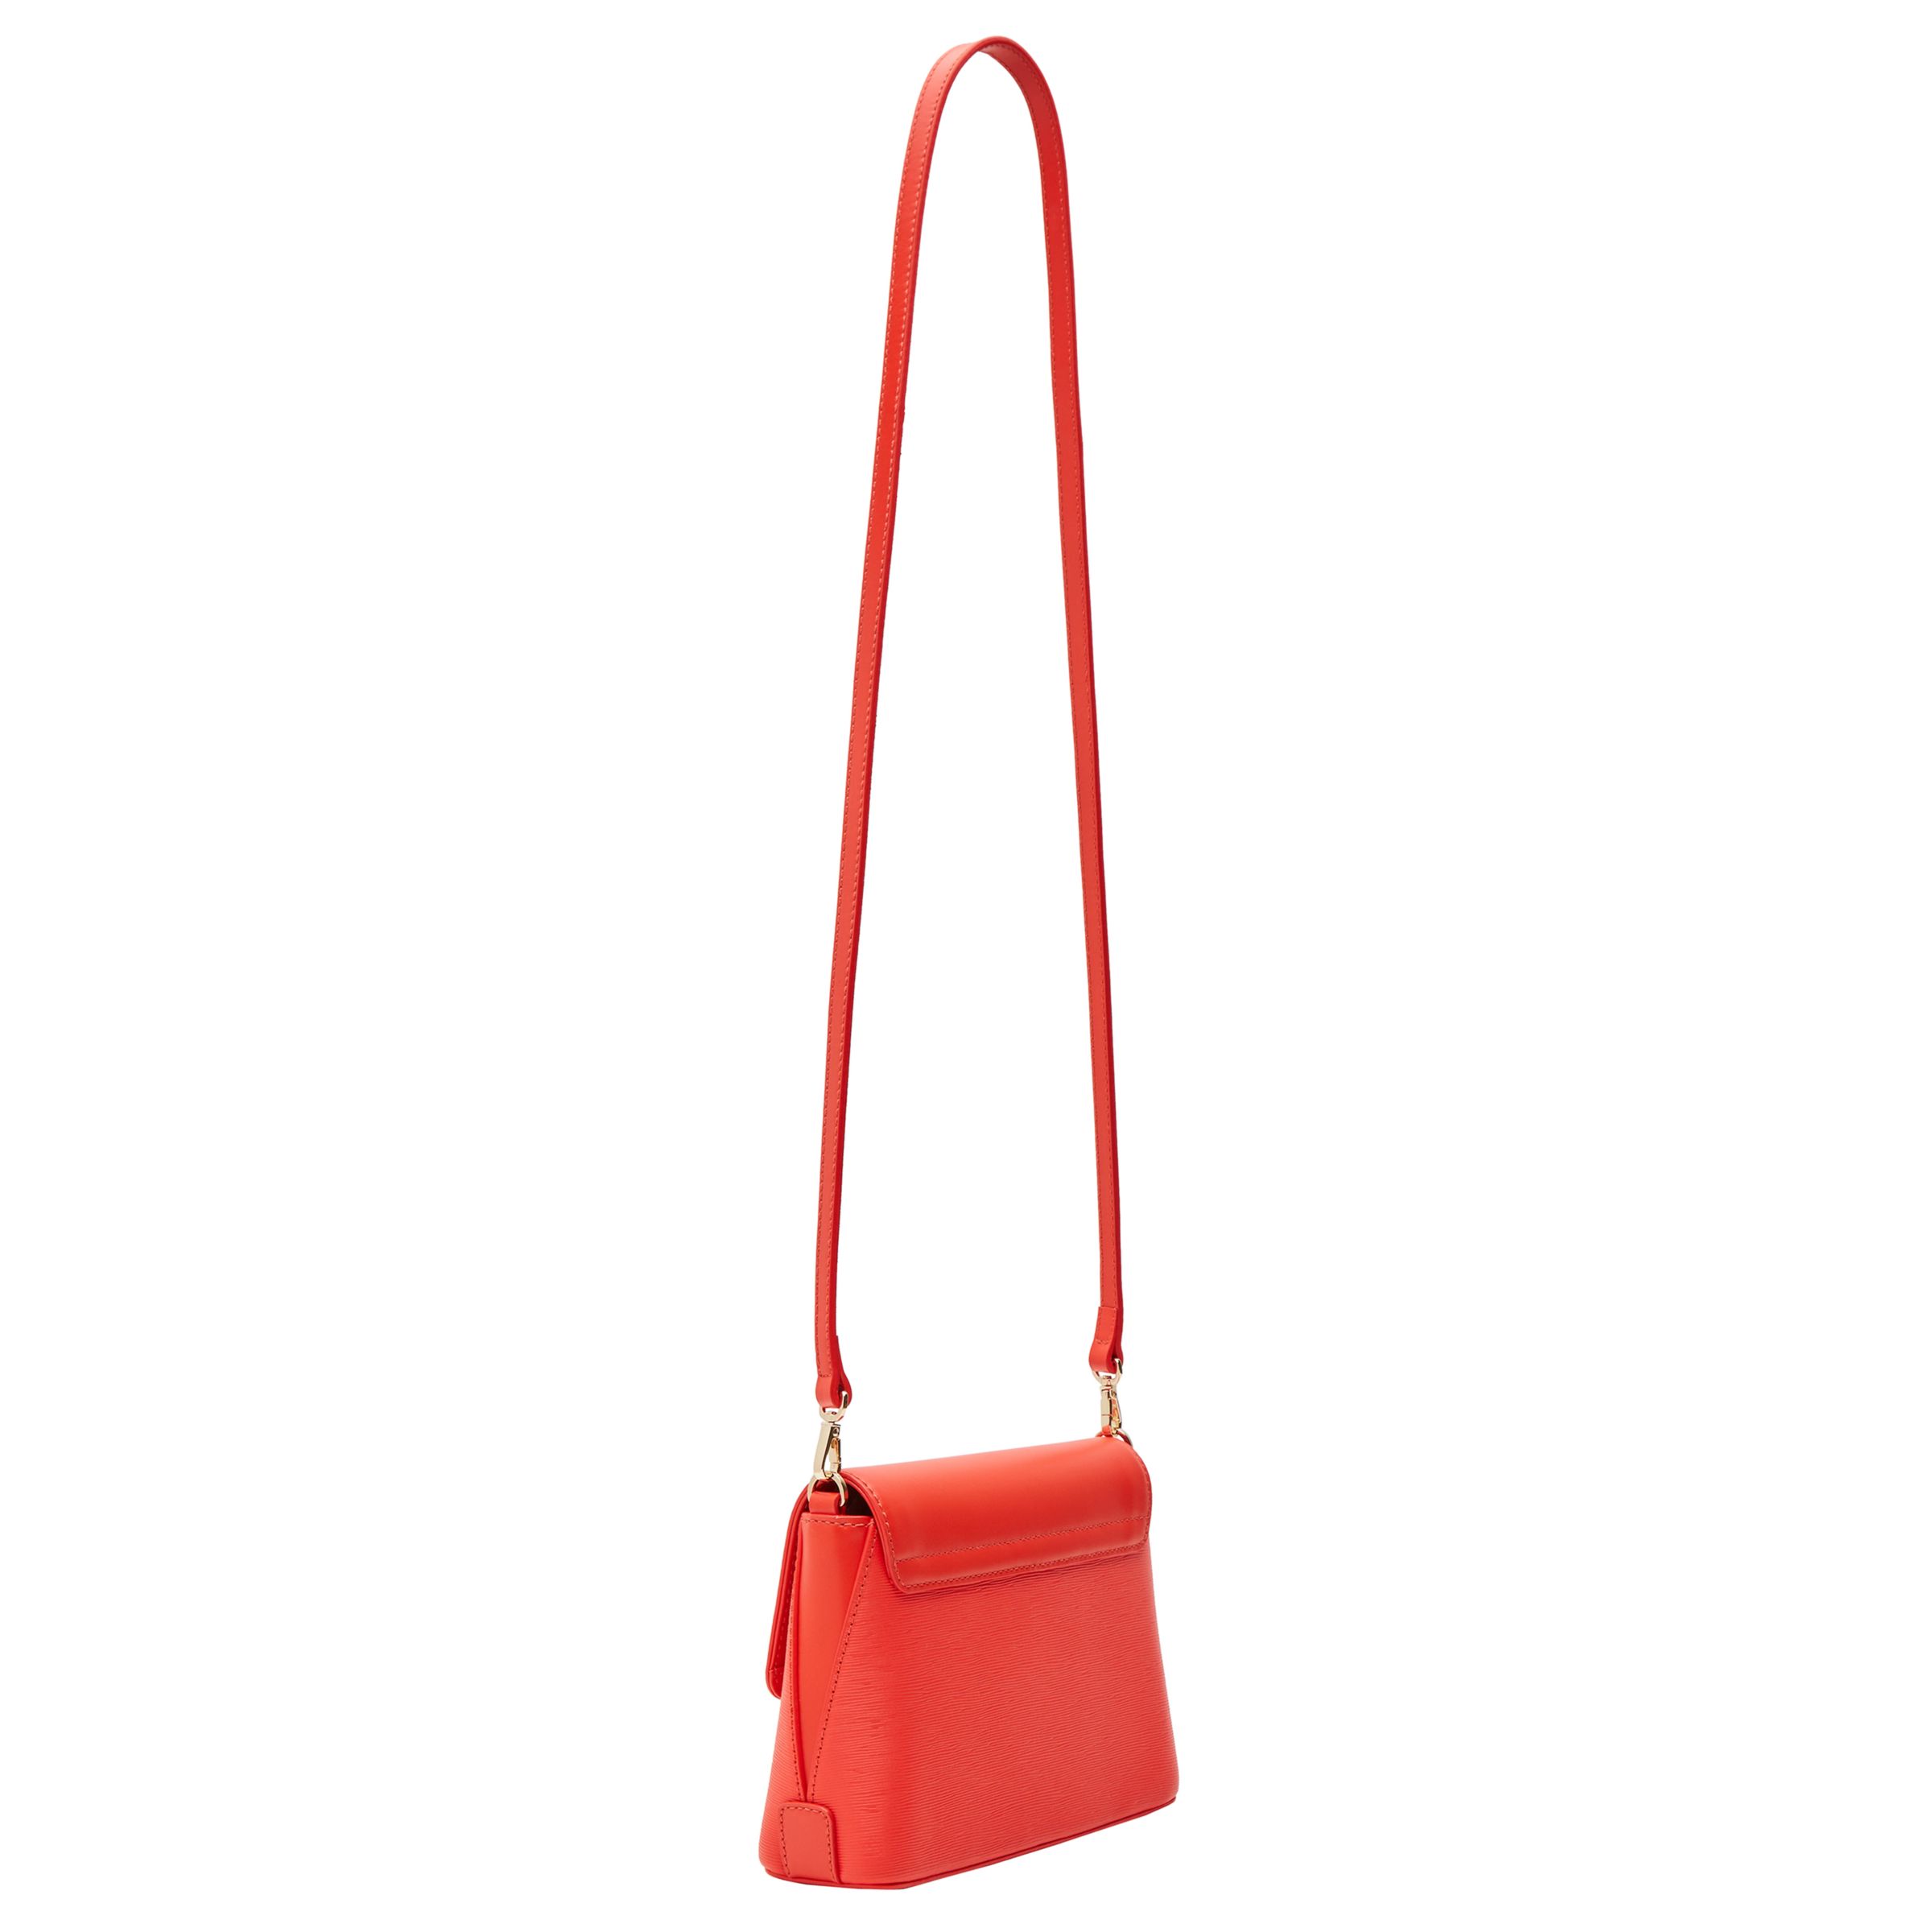 Ted Baker Tessi Curved Bow Leather Across Body Bag, Bright Orange